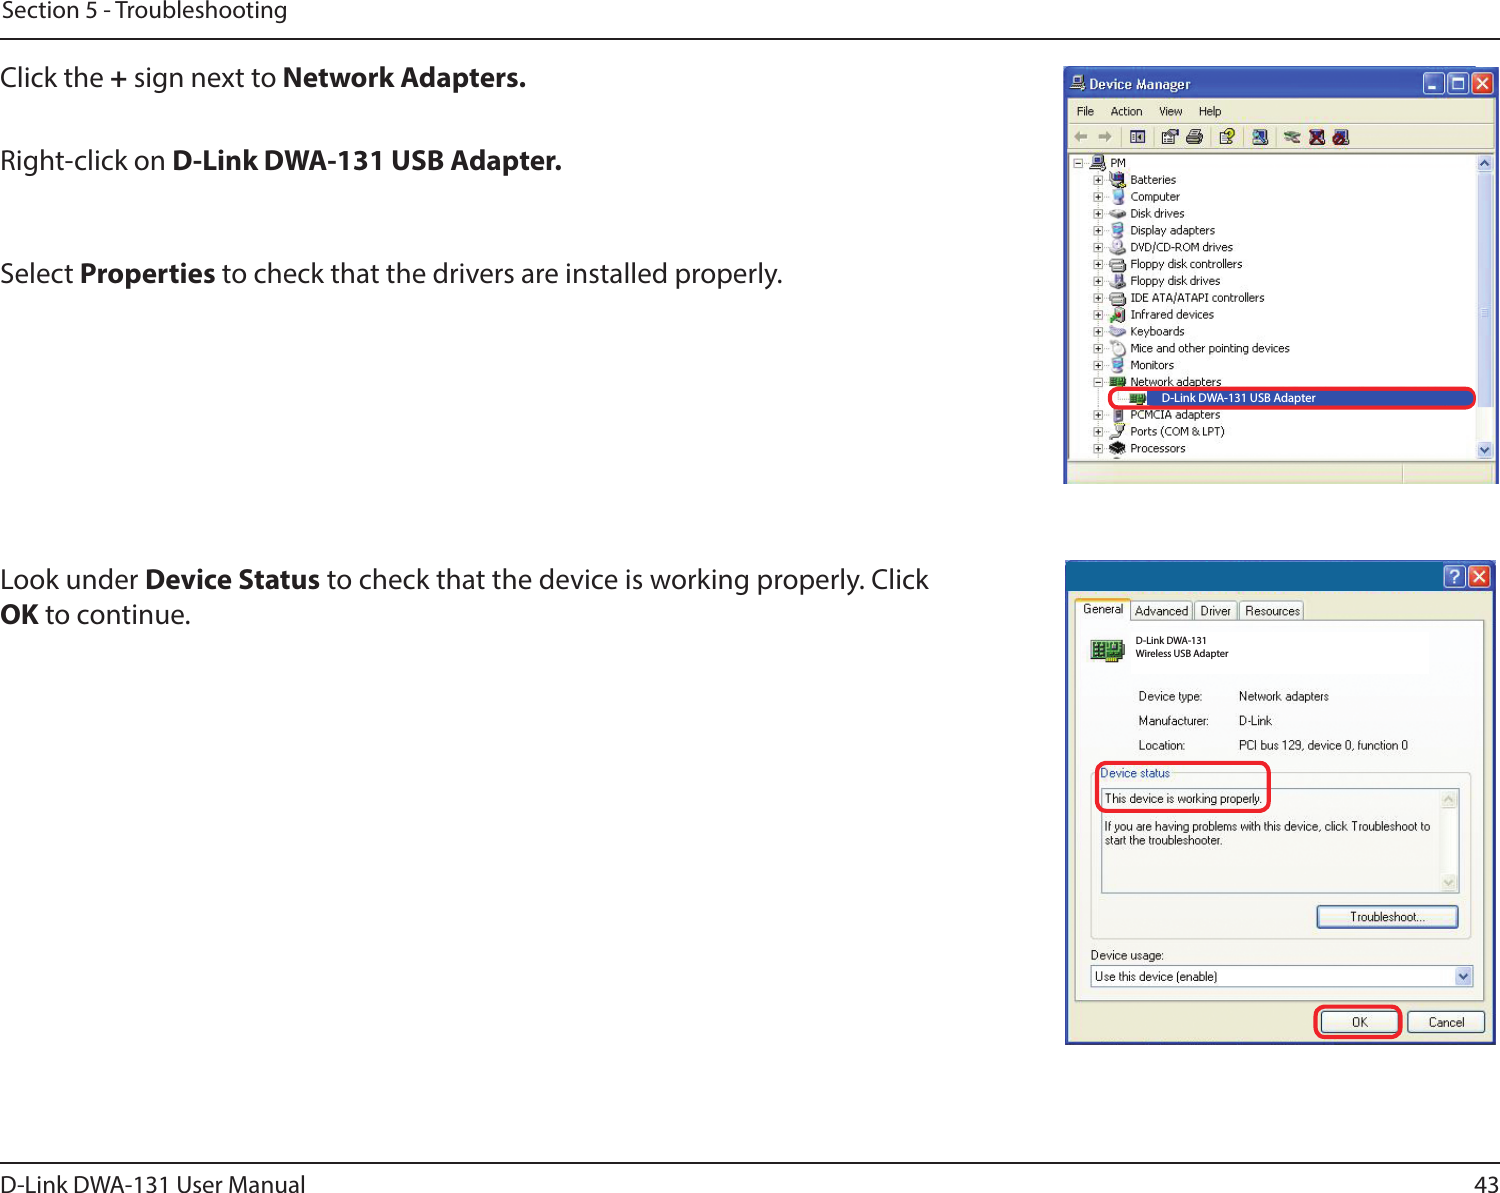 43D-Link DWA-131 User ManualSection 5 - TroubleshootingClick the + sign next to Network Adapters.Right-click on D-Link DWA-131 USB Adapter.Select Properties to check that the drivers are installed properly.Look under Device Status to check that the device is working properly. Click OK to continue.D-Link DWA-131 USB AdapterD-Link DWA-131 Wireless USB Adapter